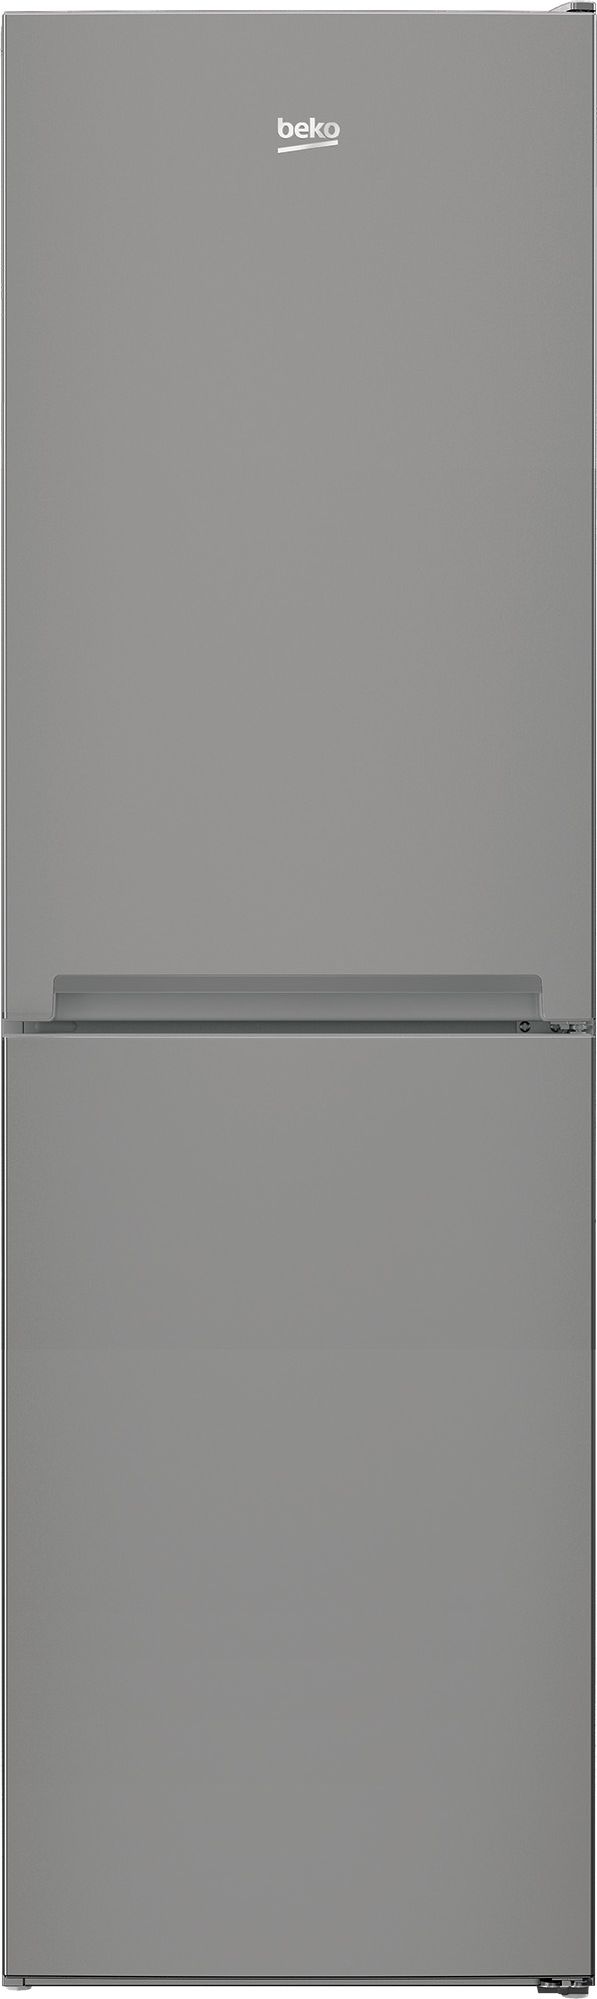 Beko CFG4582S 50/50 Frost Free Fridge Freezer - Silver - E Rated, Silver